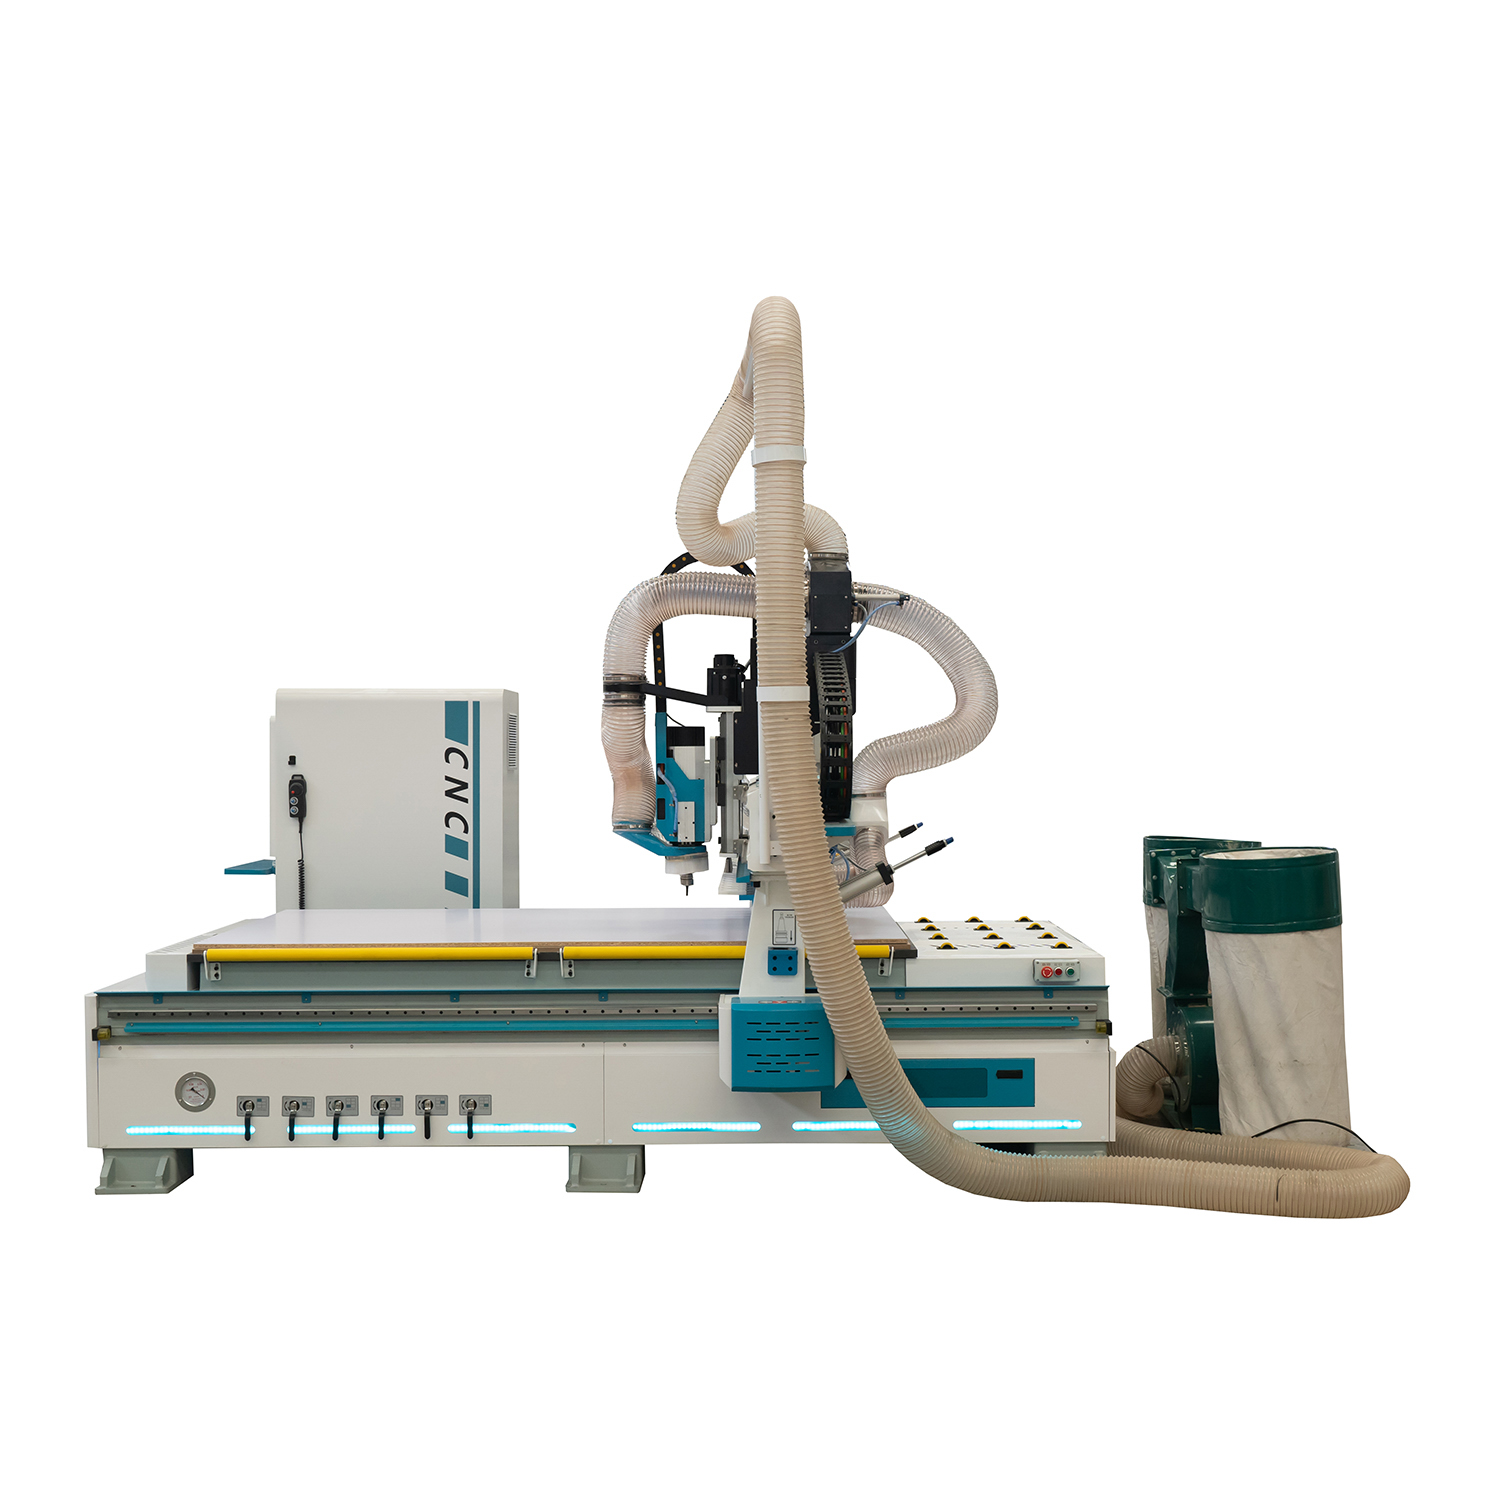 Wood CNC Router with Disc ATC faster tool changing Featured Image